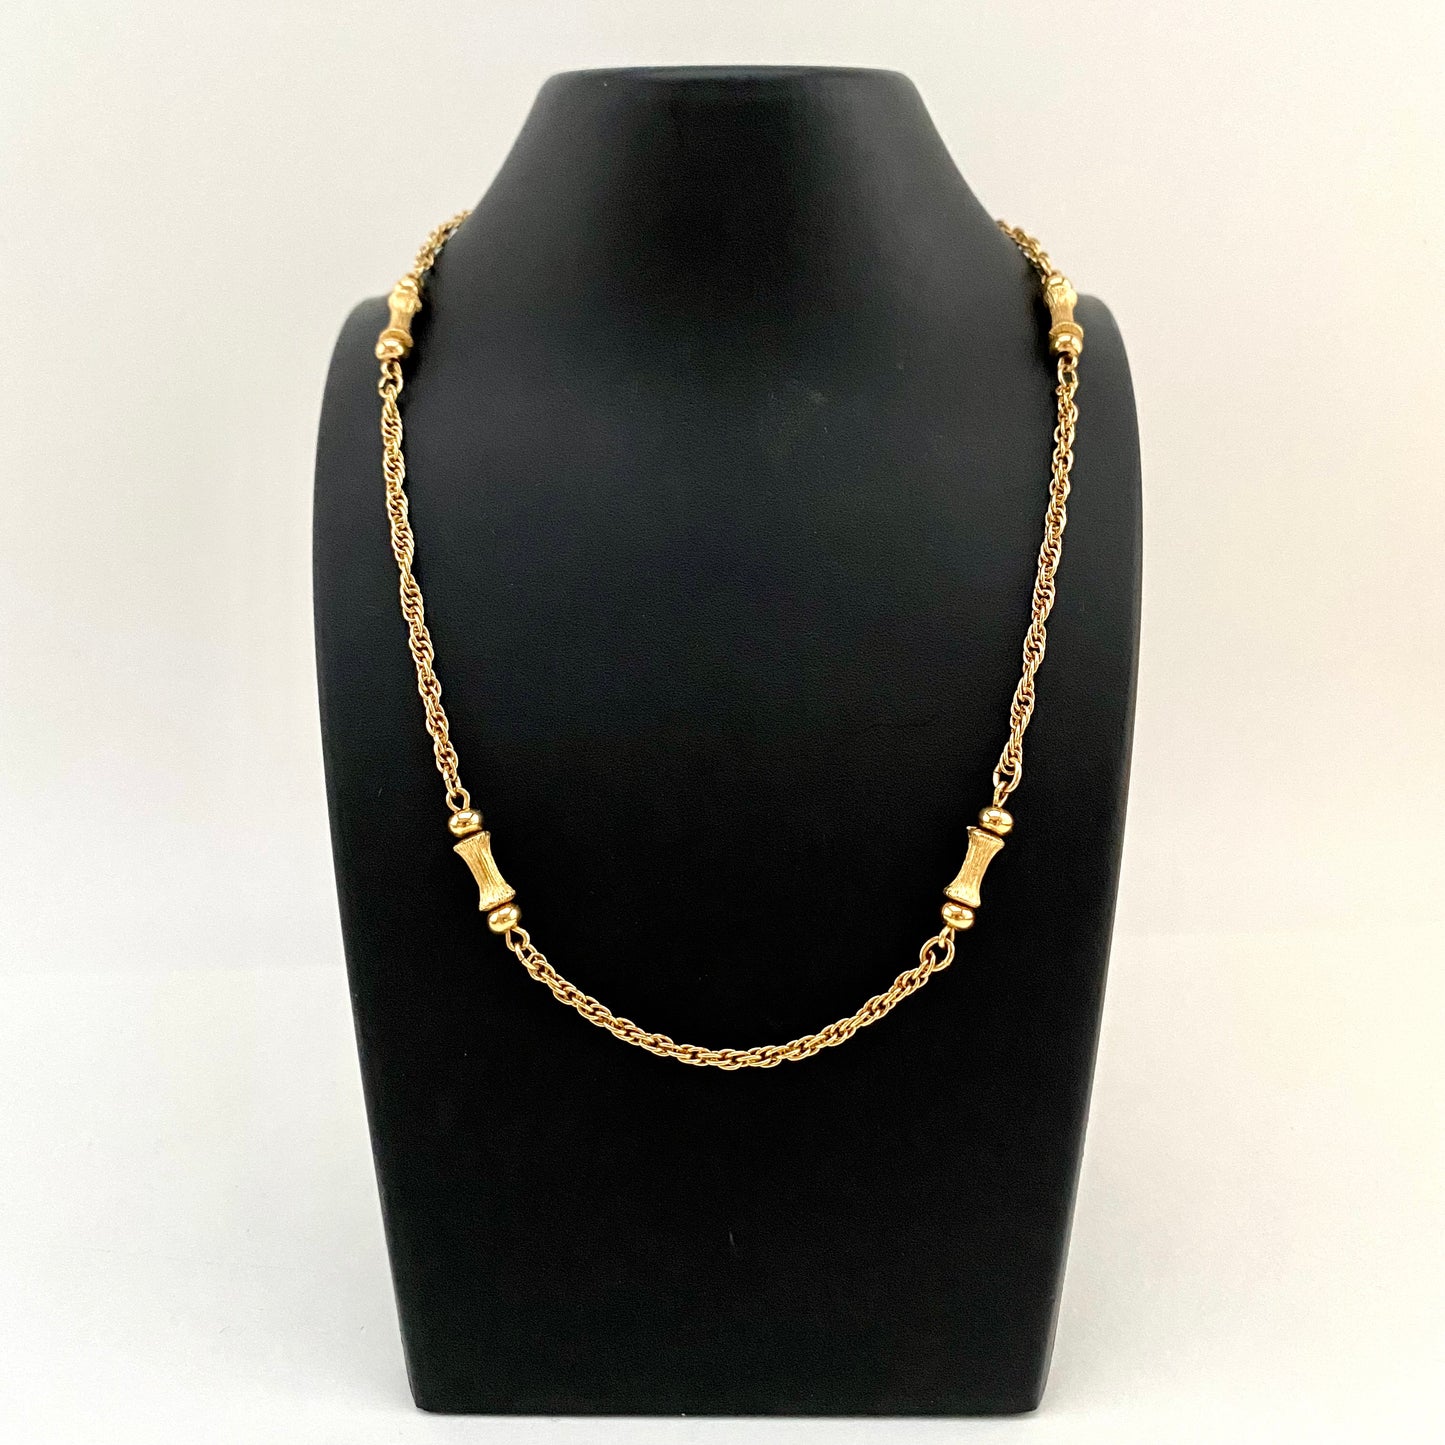 Late 40s/ Early 50s Monet Gold-Tone Chocker